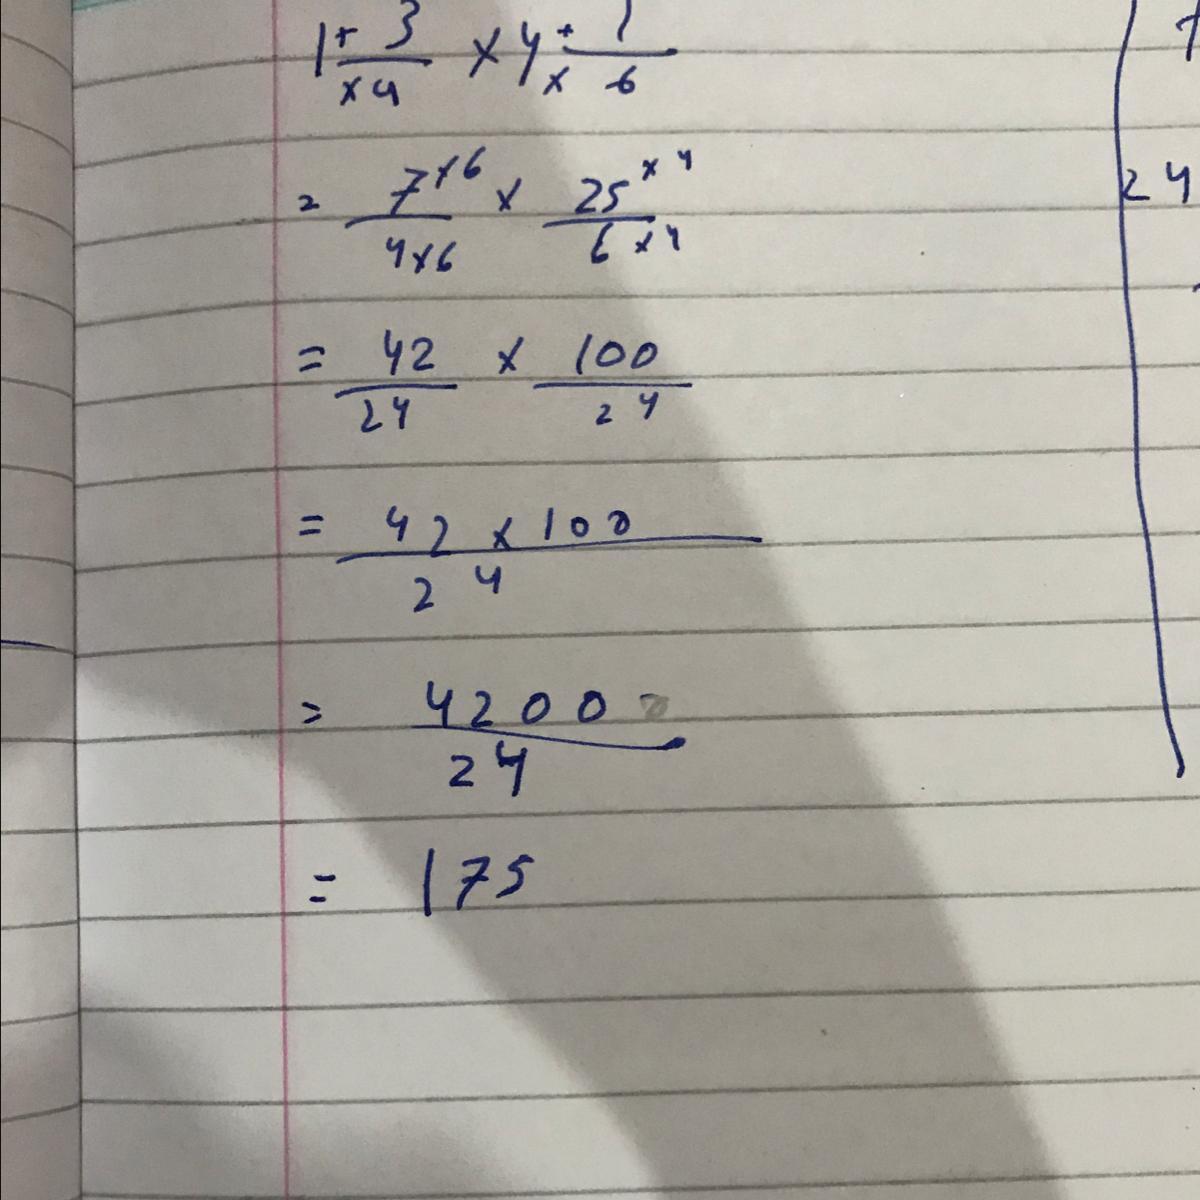 Can Someone Help Me With This Please - Can You Also Give A Step By Step Not Just An Answer 